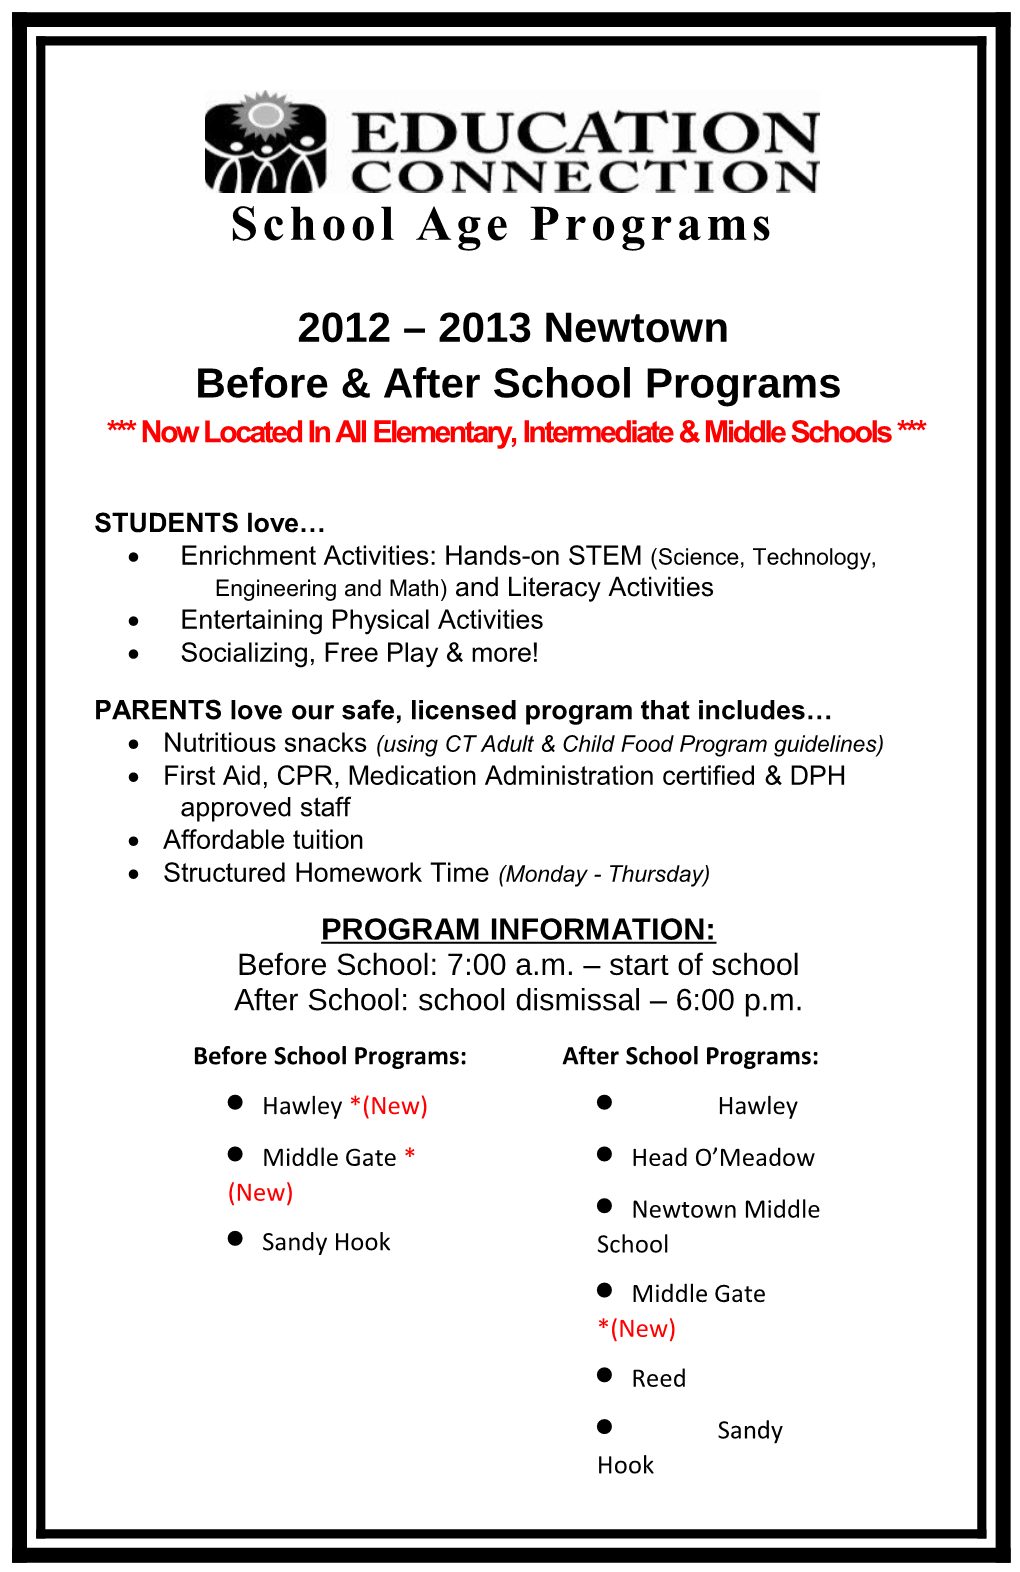 Before & After School Programs